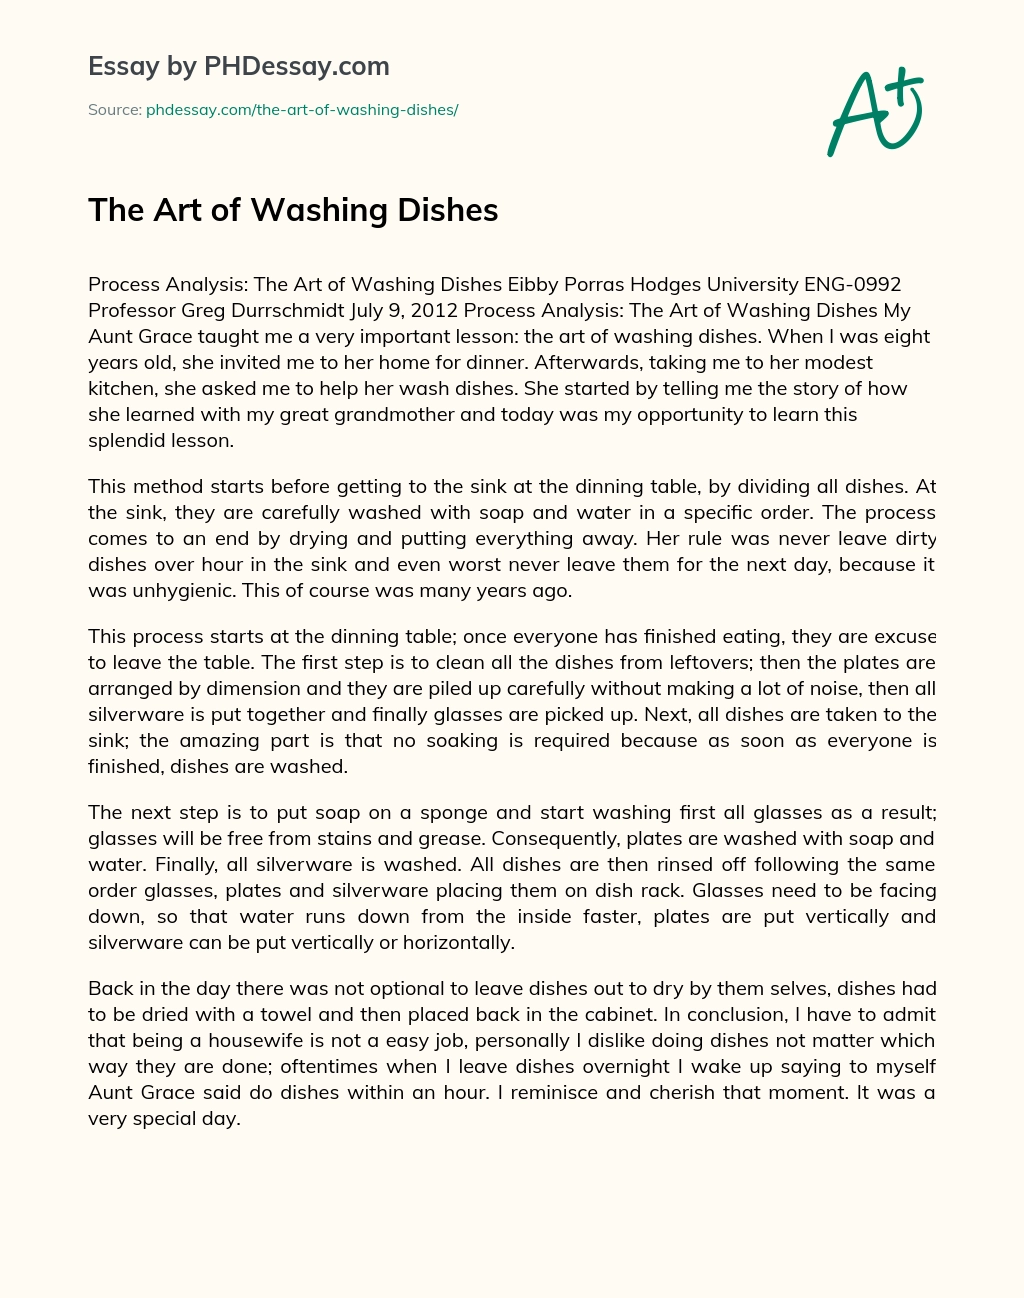 The Art of Washing Dishes essay